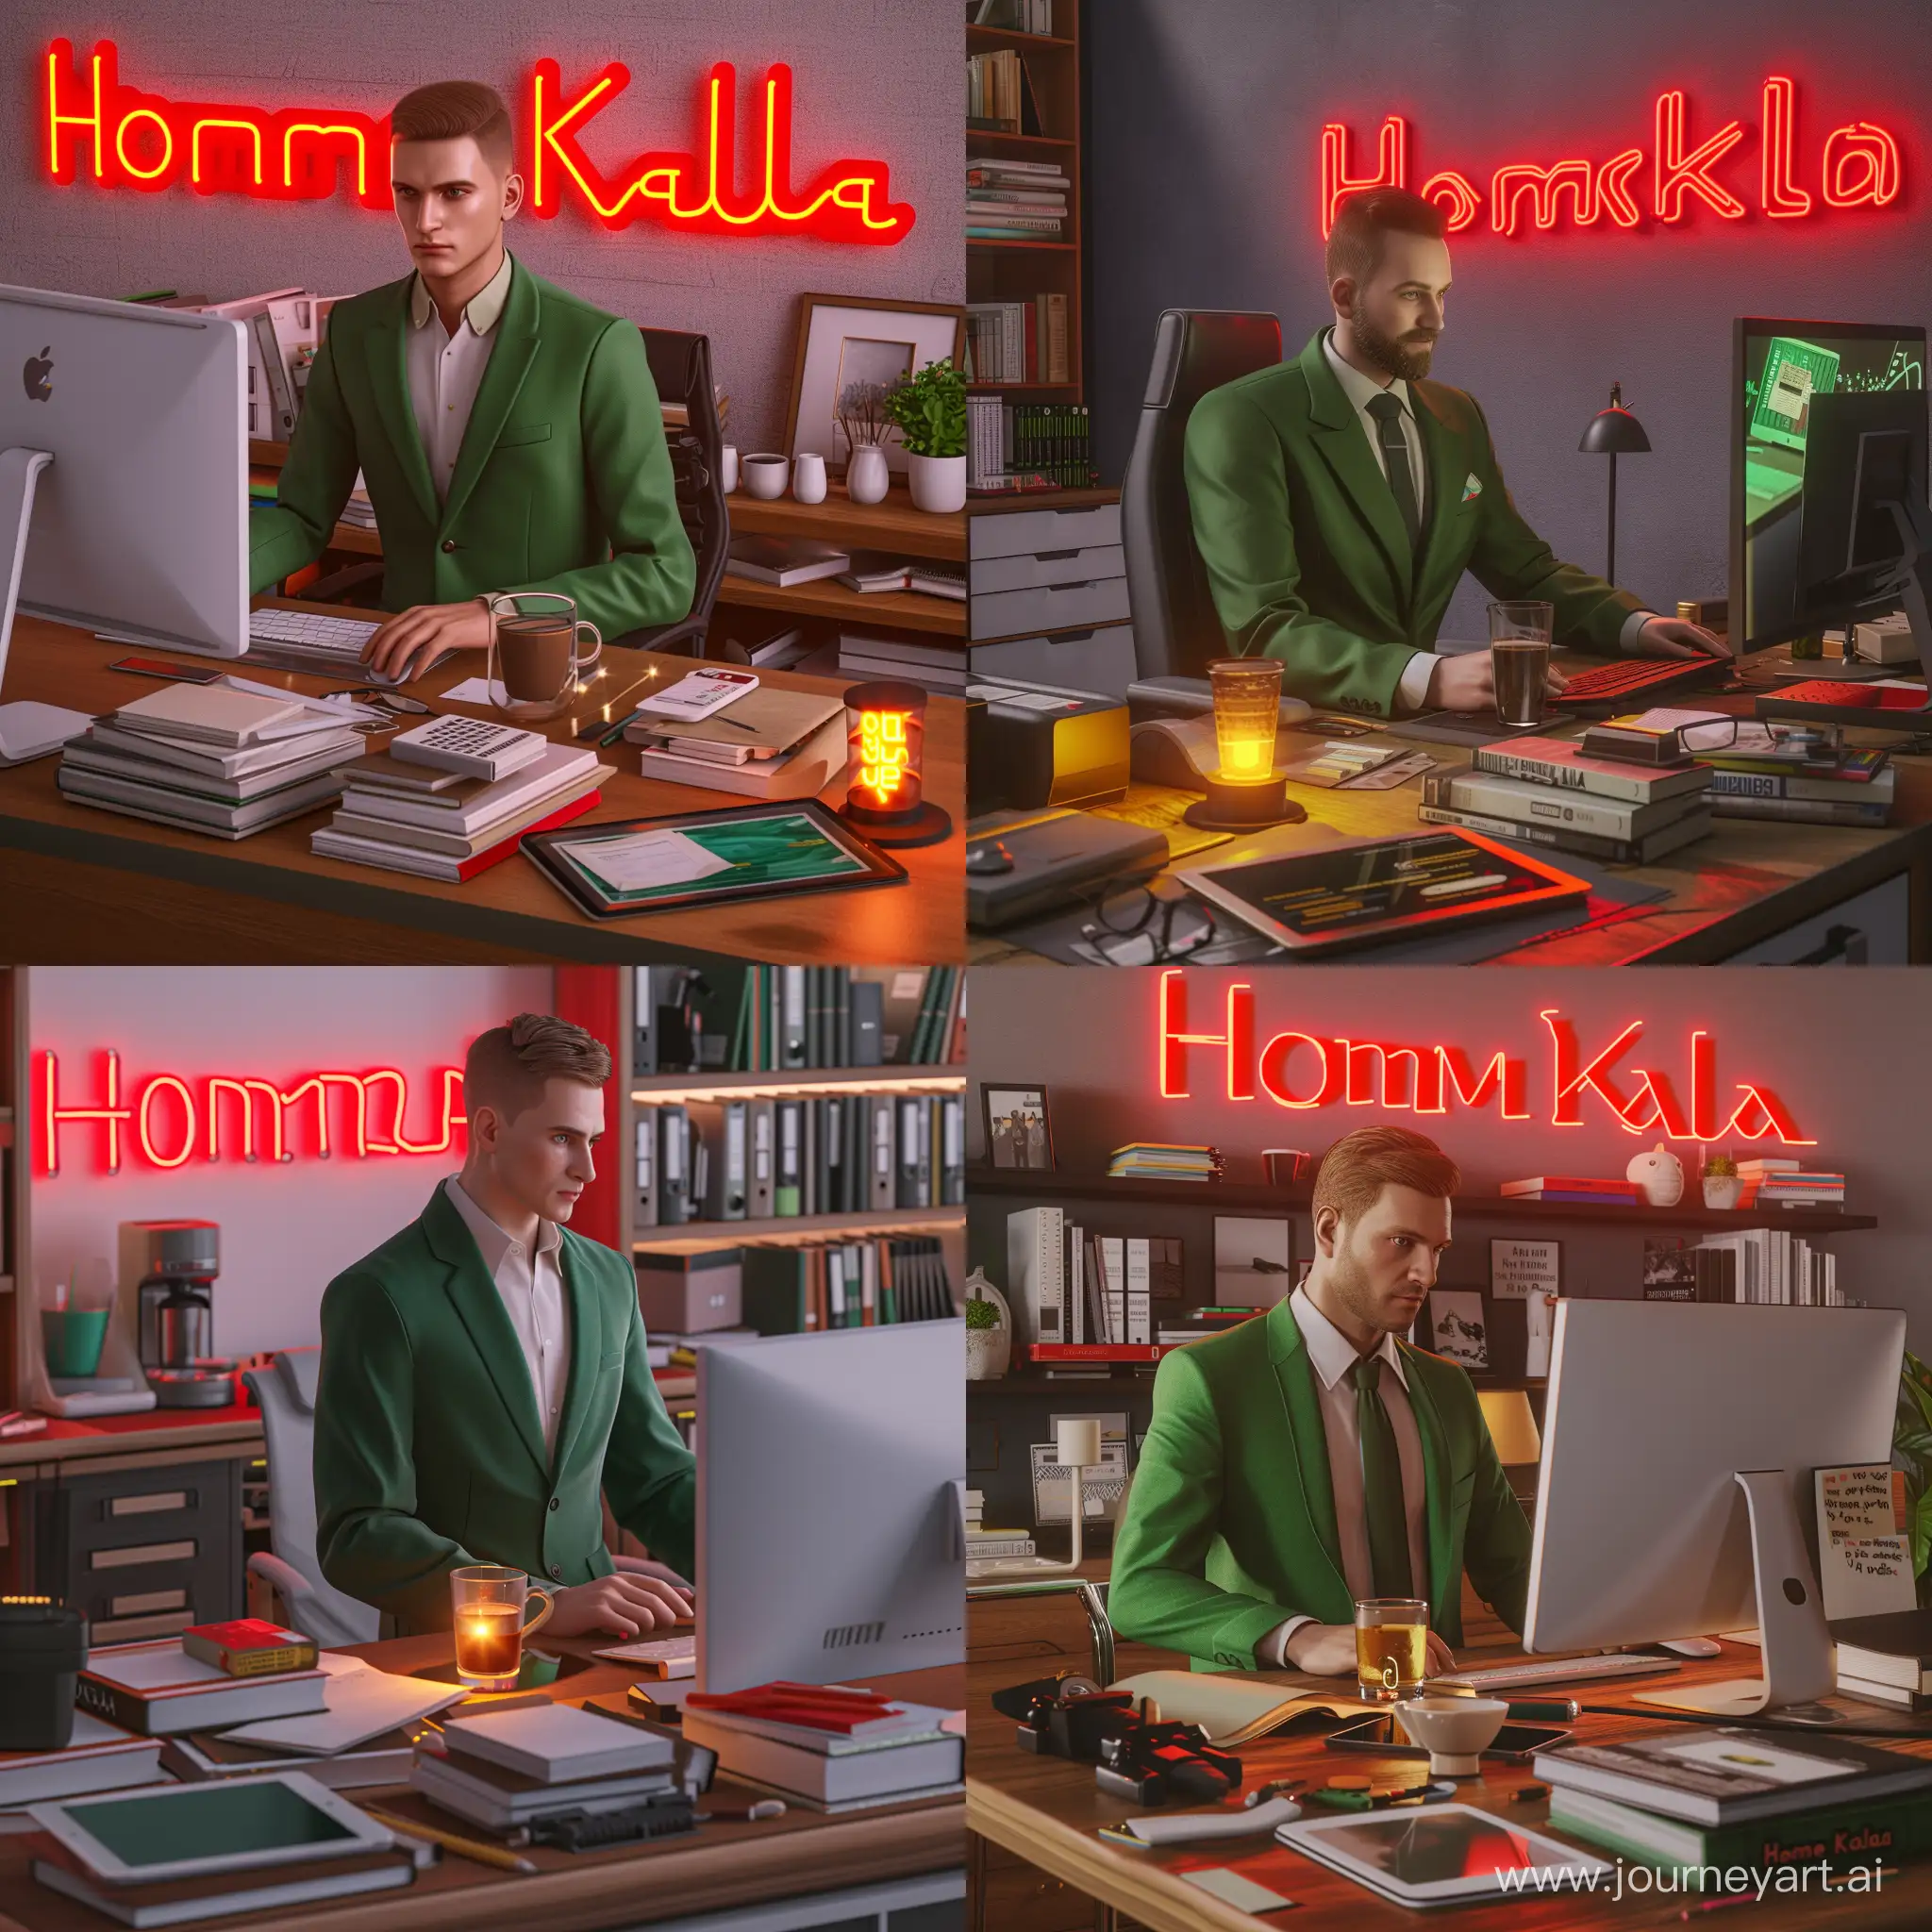 Stylish-Green-Suit-Office-Workspace-with-HomeKala-Neon-Sign